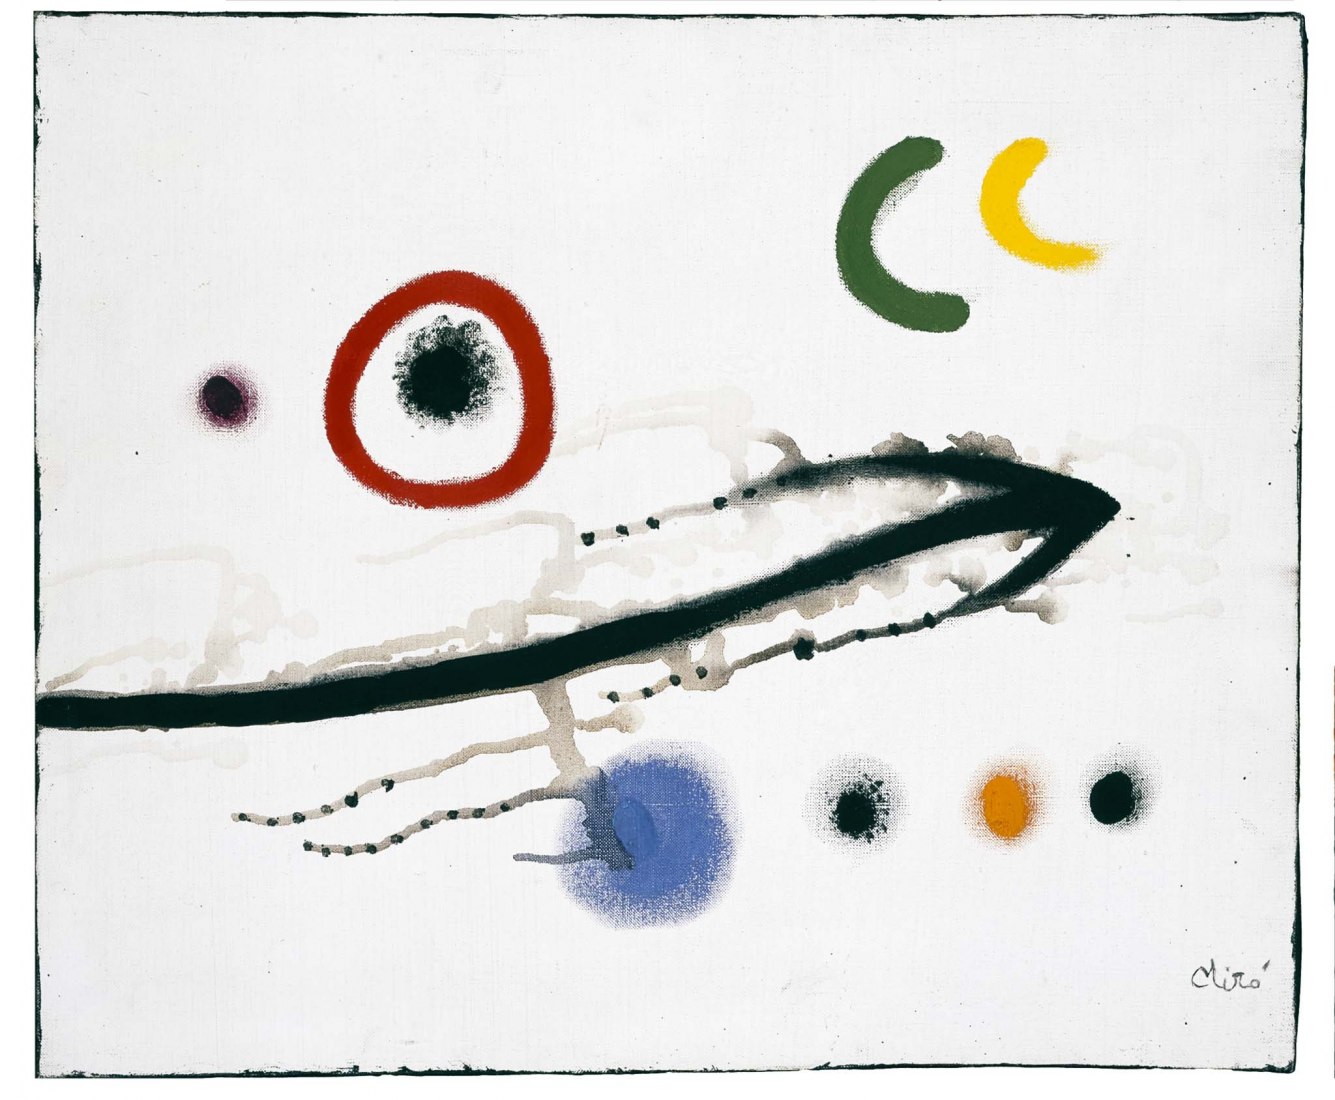 THE SECRETS OF MIRO'S ART, artist of Spanish abstraction - Angeles Earth